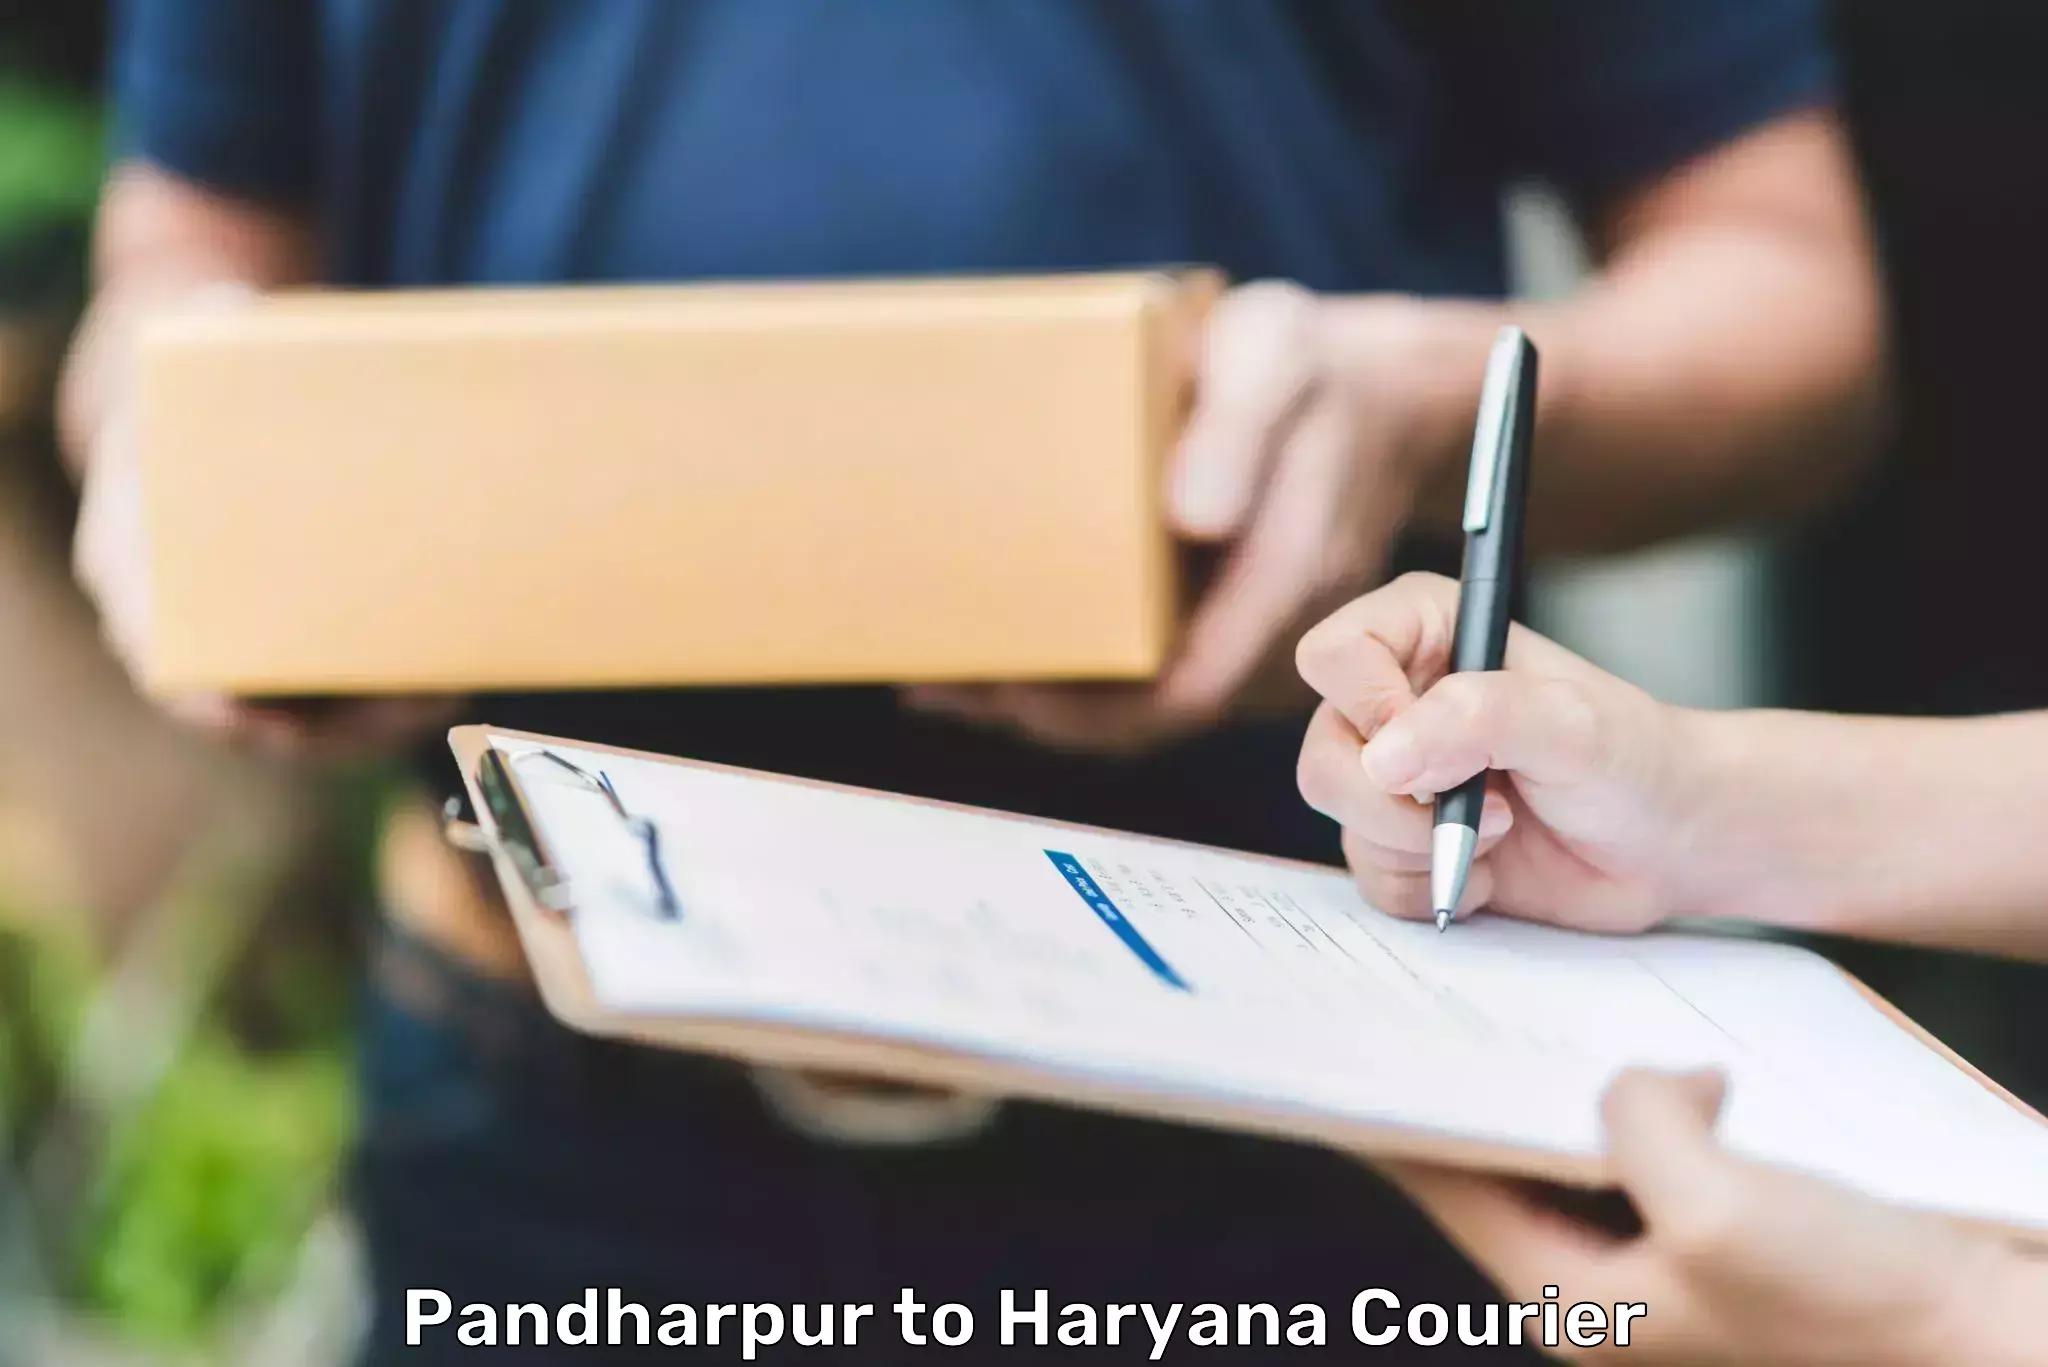 State-of-the-art courier technology Pandharpur to Bhiwani